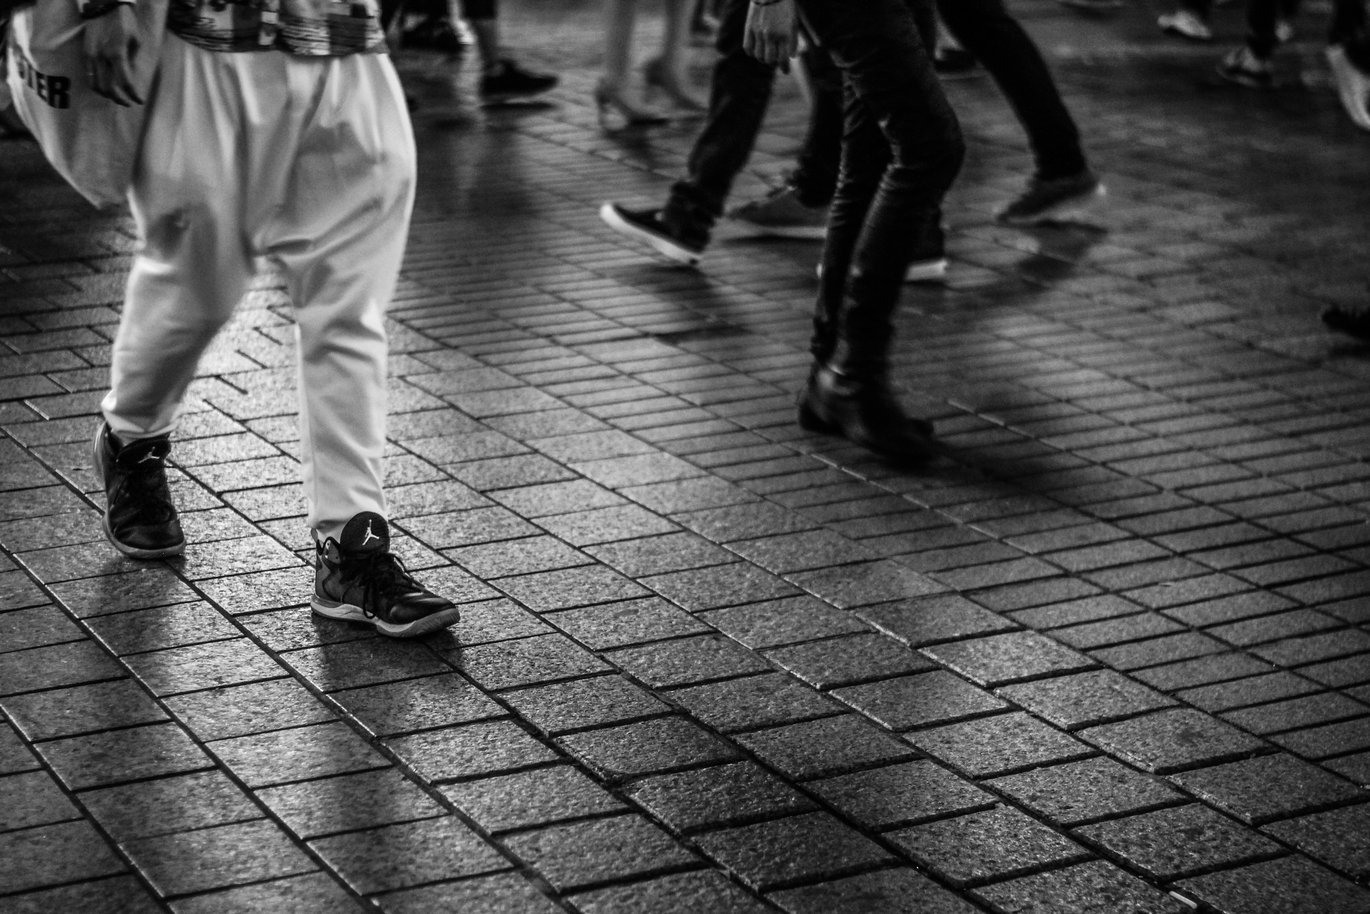 Feet and legs of people walking, black and white